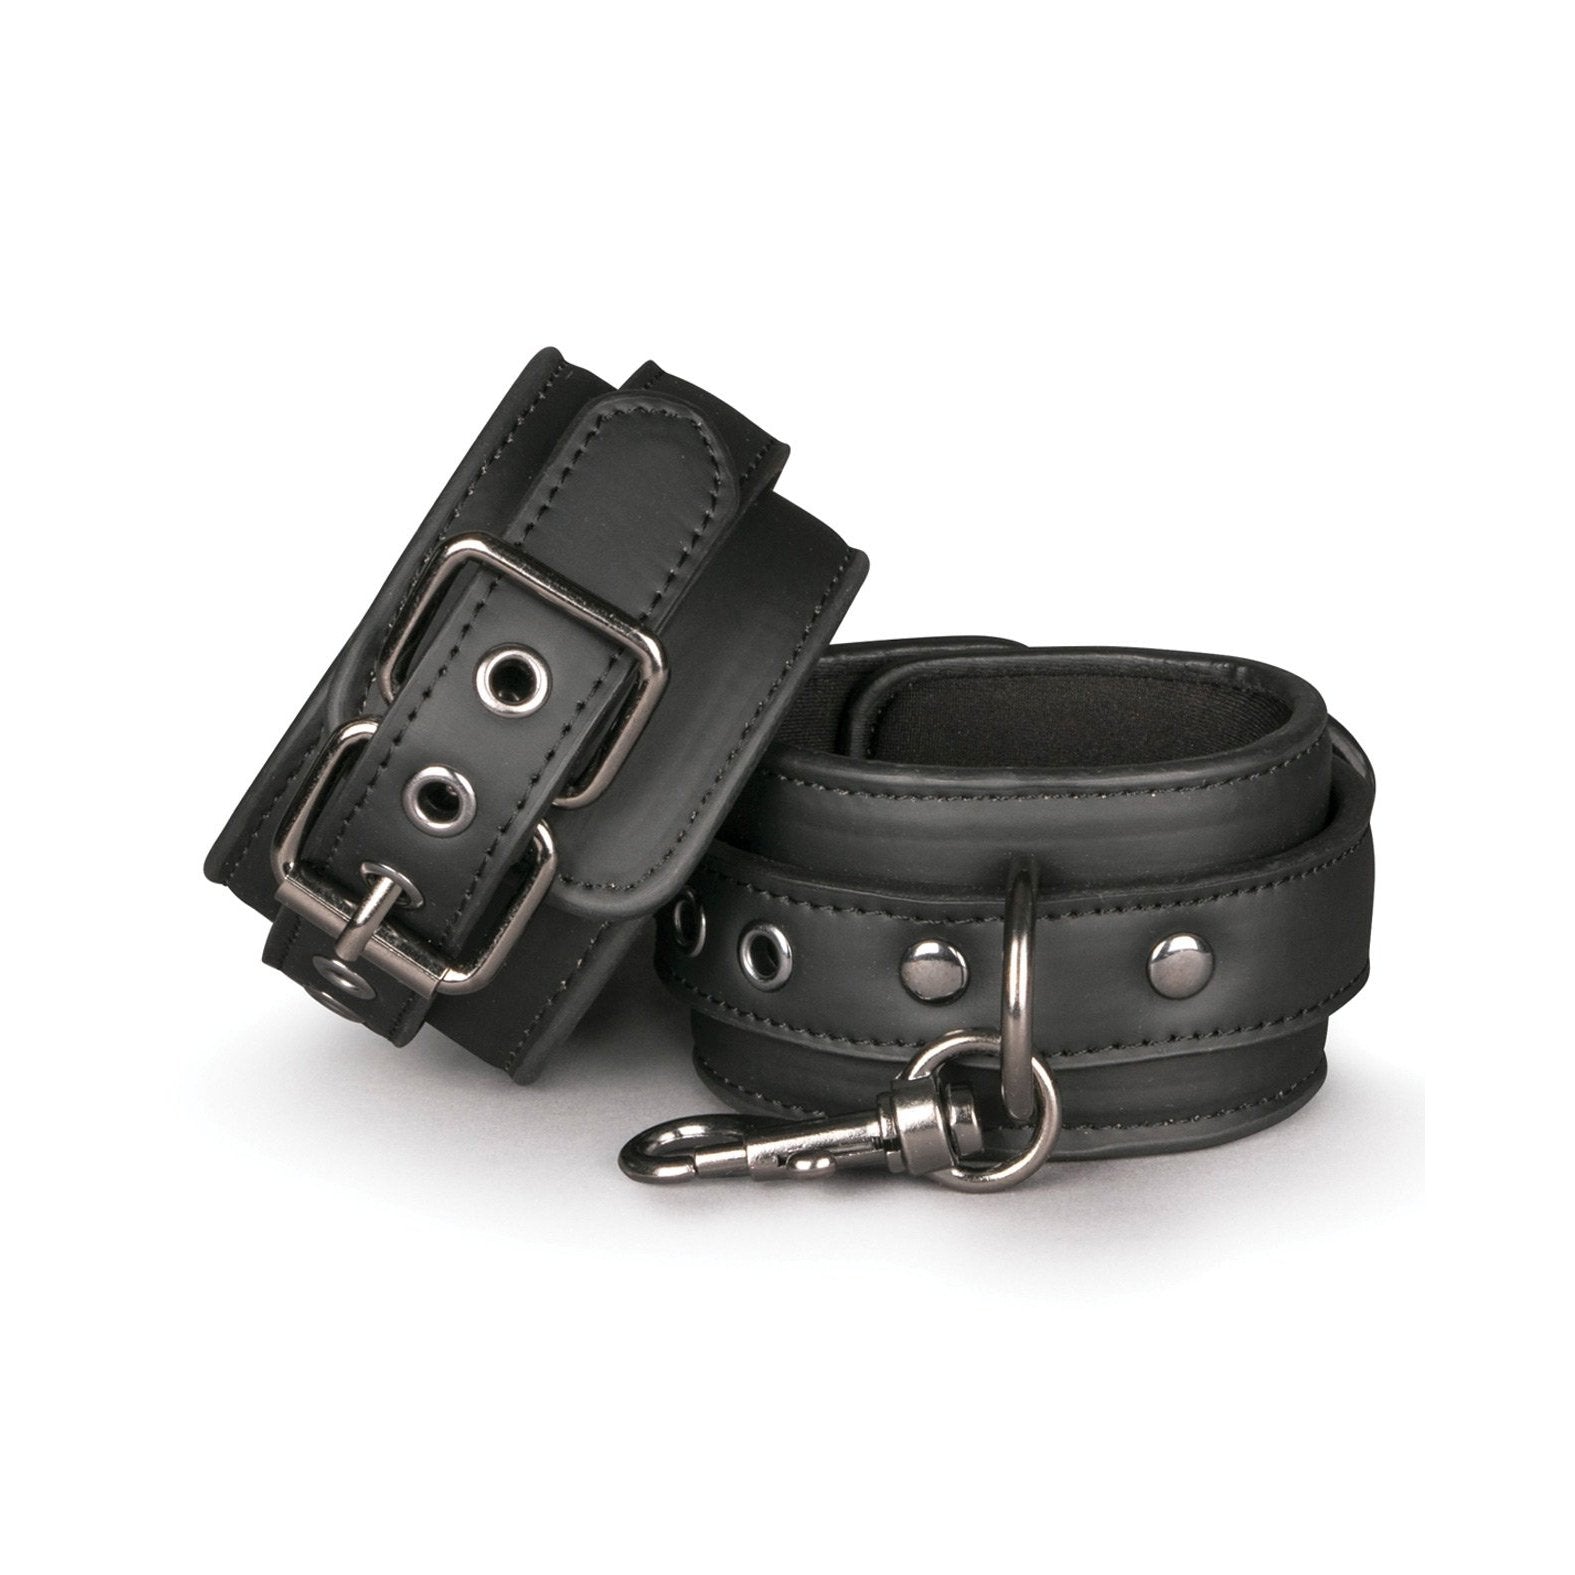 Easy Toys Faux Leather Handcuffs